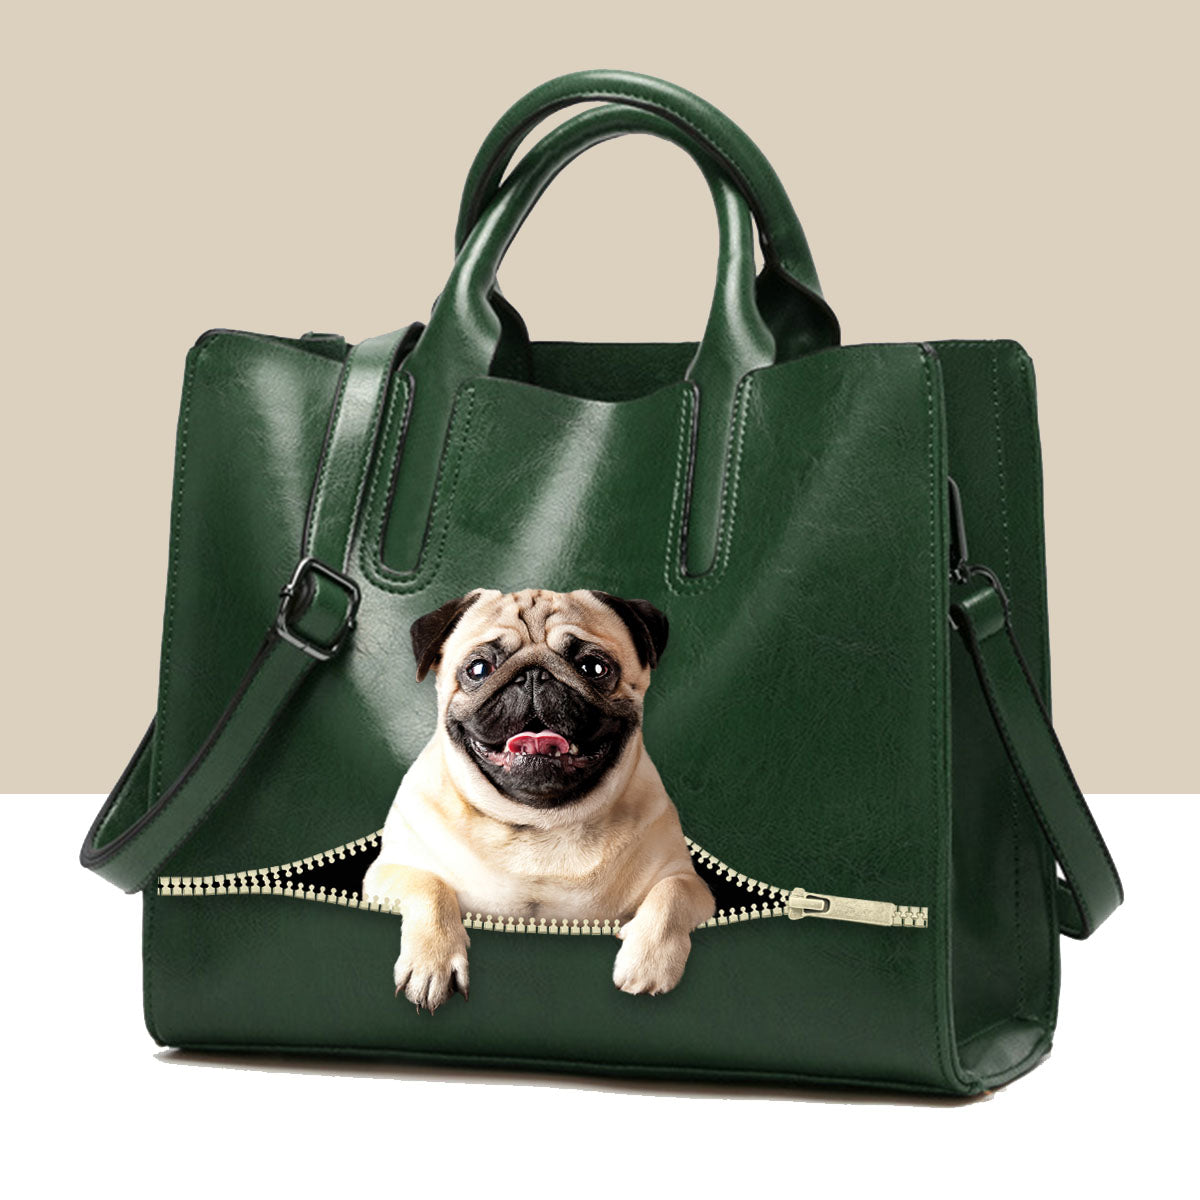 Chill Out Time With Pug – Luxushandtasche V1